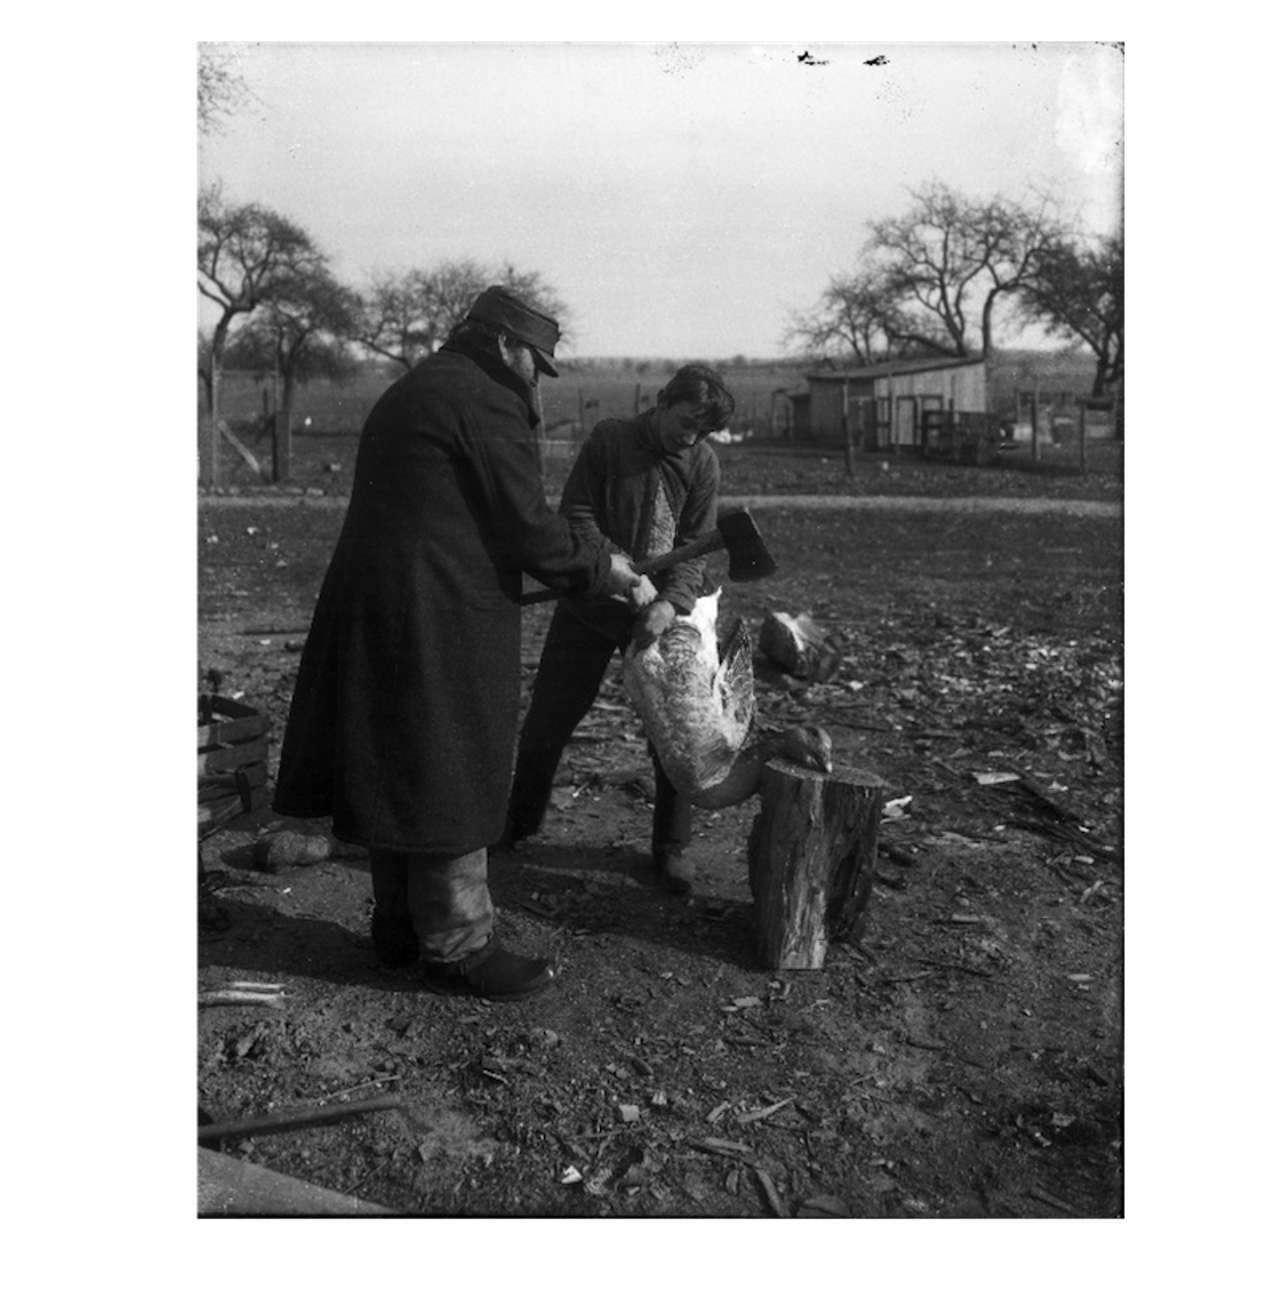 Farmer killing turkey.
All photos courtesy of Walter P. Reuther Library, Archives of Labor and Urban Affairs, Wayne State University